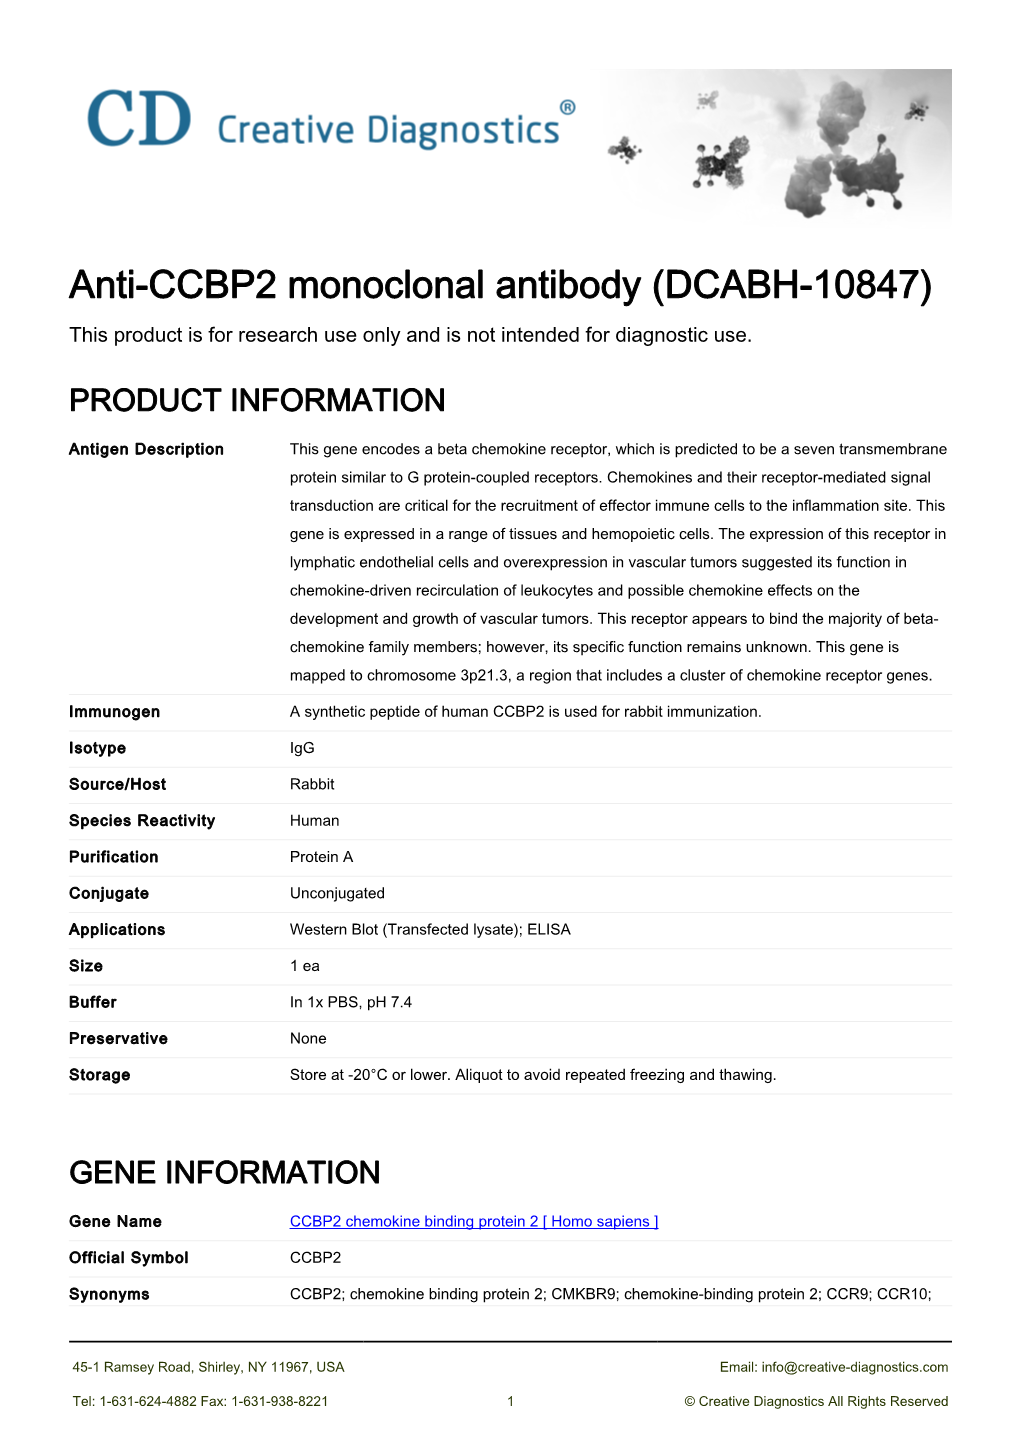 Anti-CCBP2 Monoclonal Antibody (DCABH-10847) This Product Is for Research Use Only and Is Not Intended for Diagnostic Use